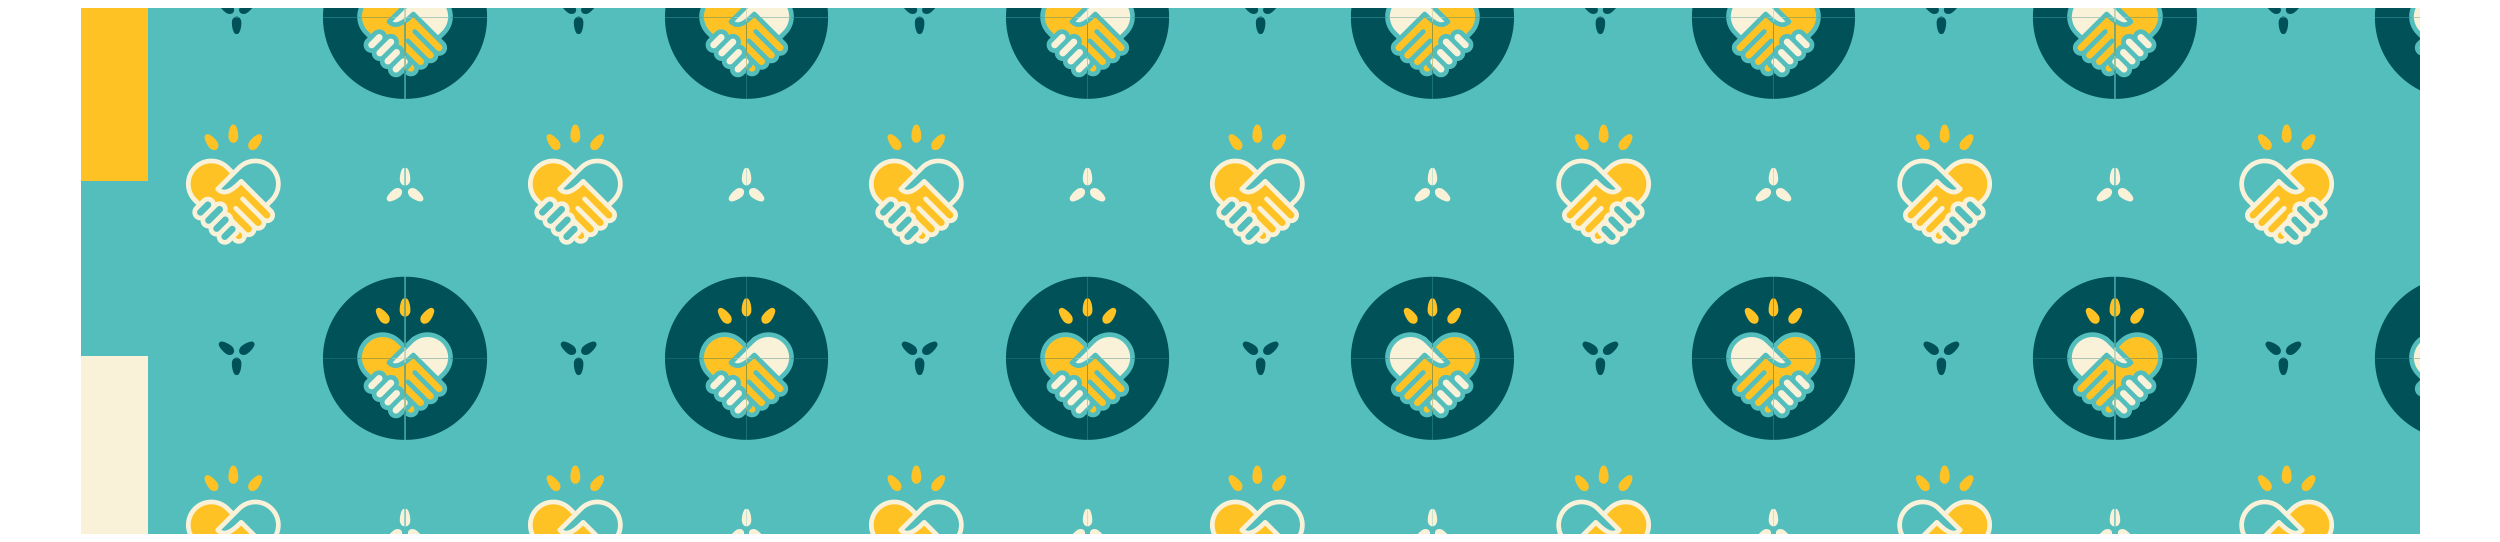 Connection zone teal pattern hands shaking icons